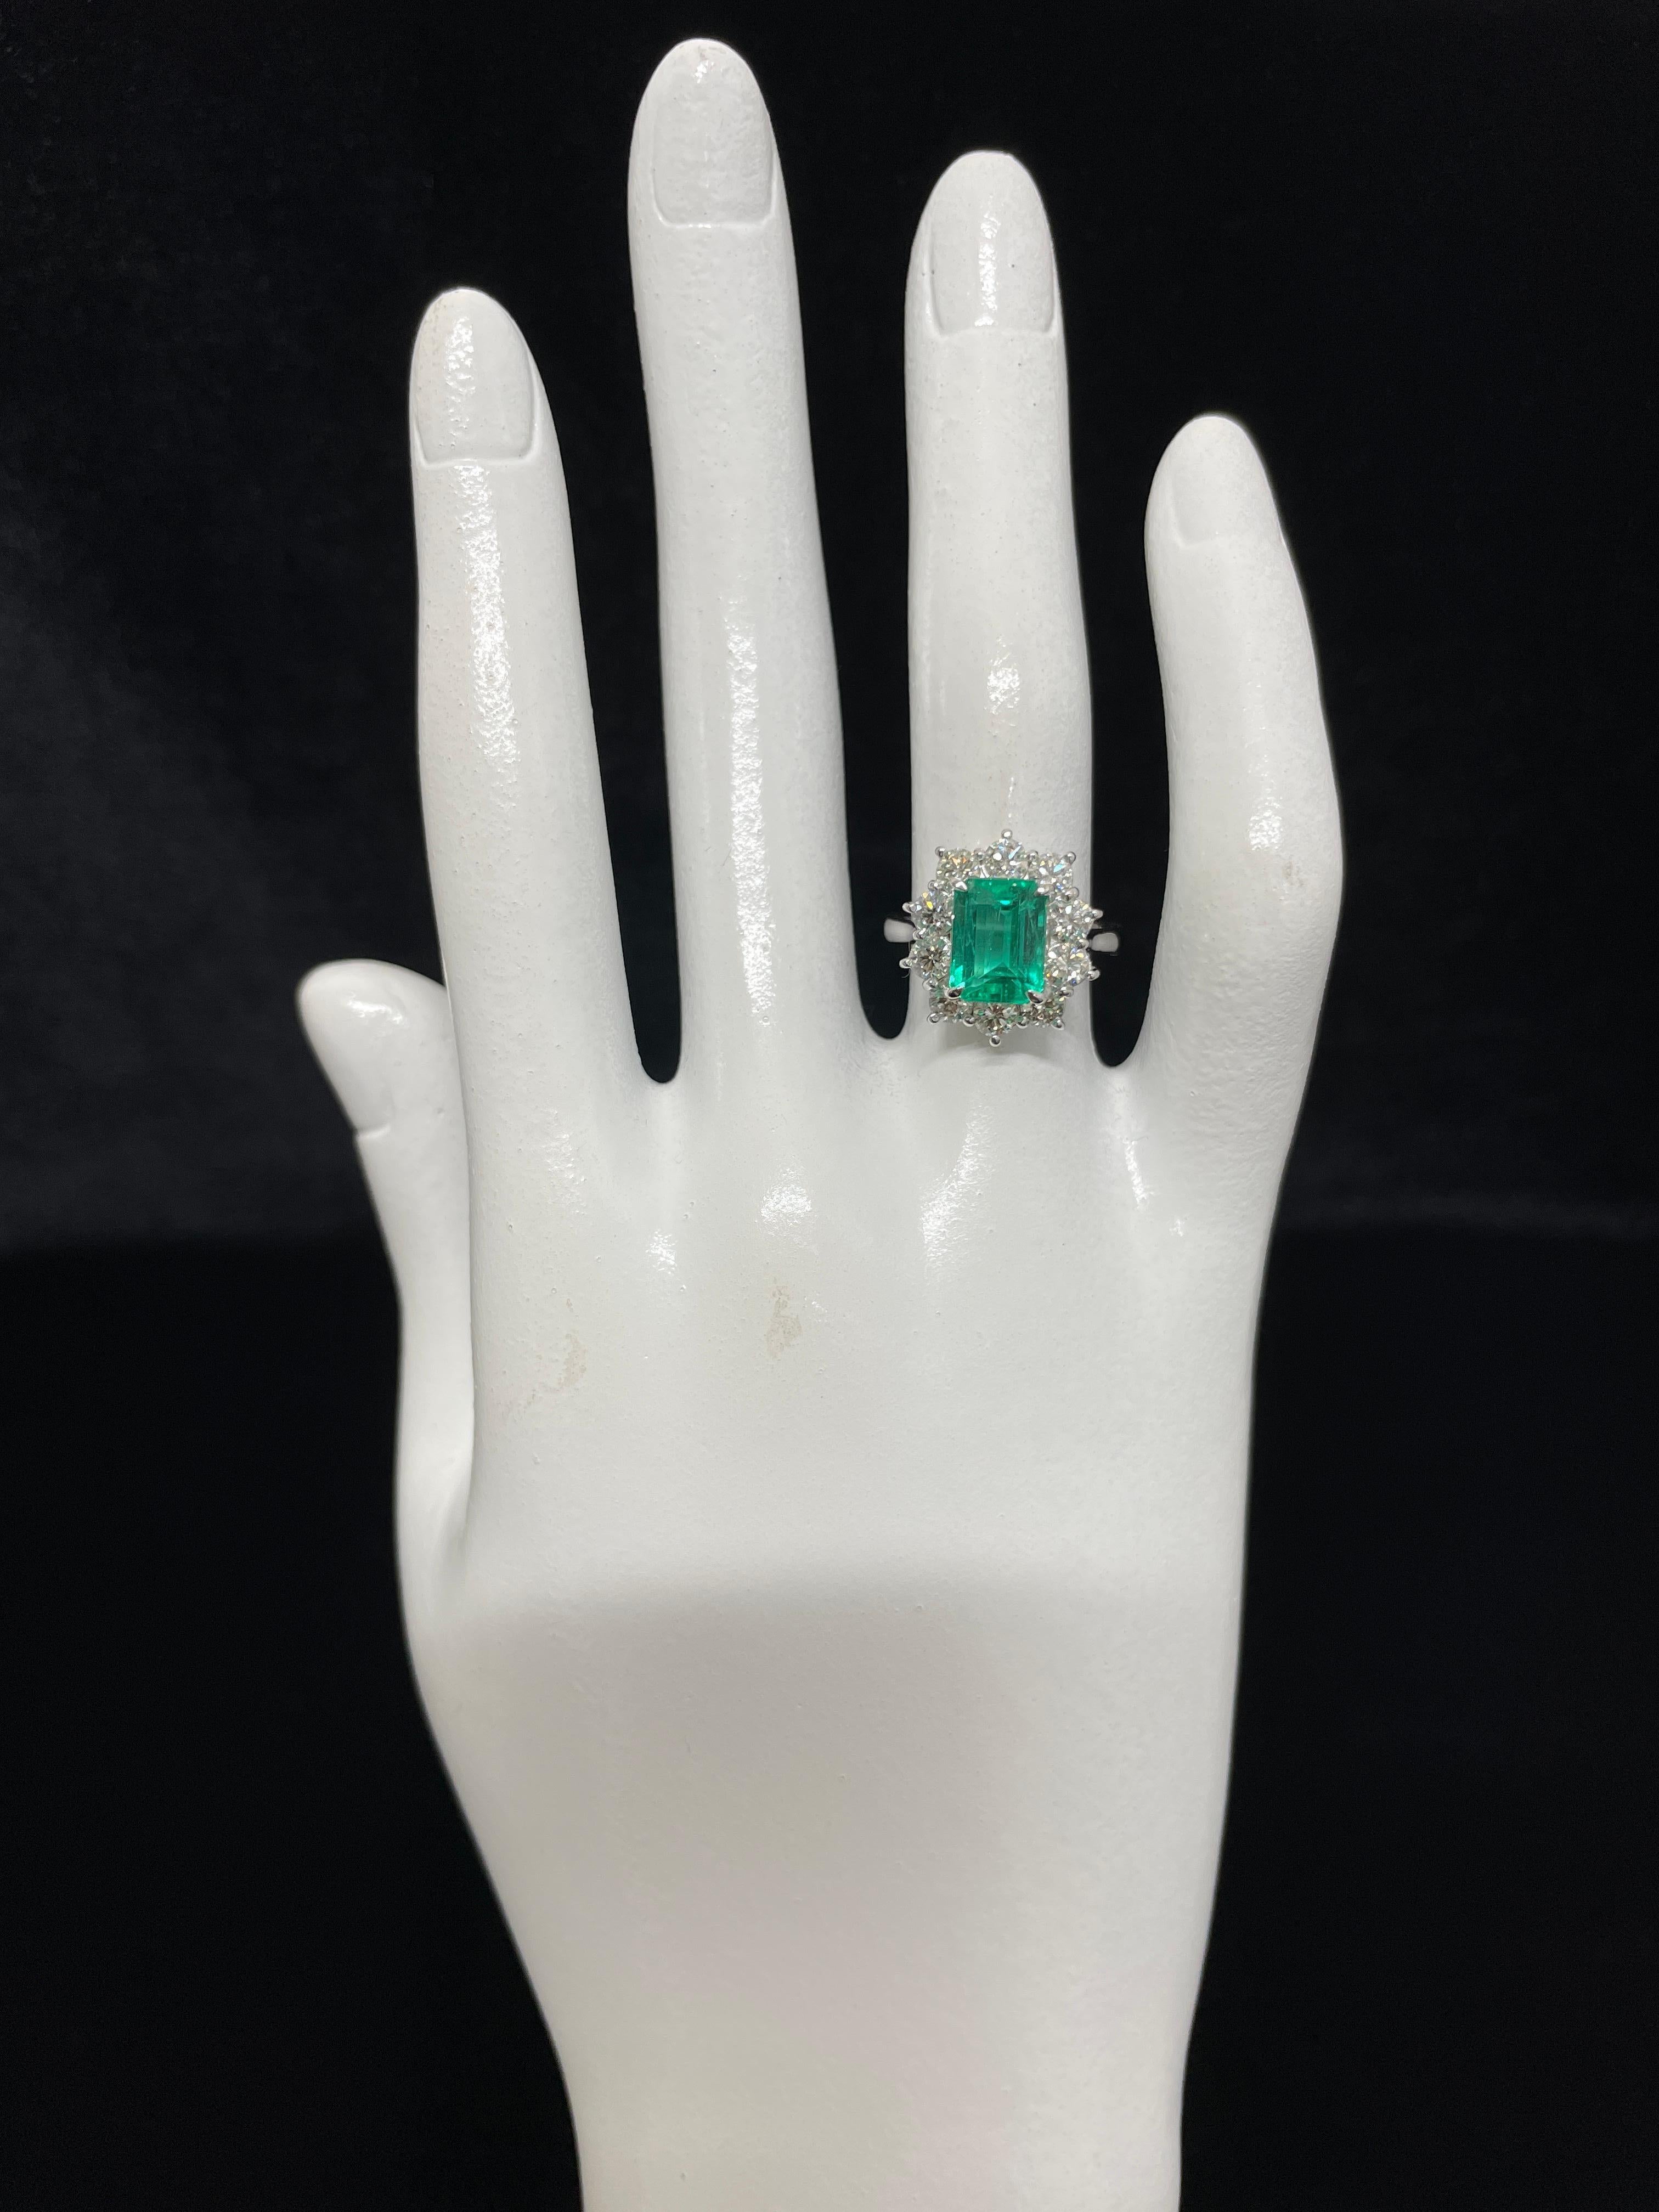 A stunning ring featuring a 2.38 Carat Natural Colombian Emerald and 1.23 Carats of Diamond Accents set in Platinum. People have admired emerald’s green for thousands of years. Emeralds have always been associated with the lushest landscapes and the